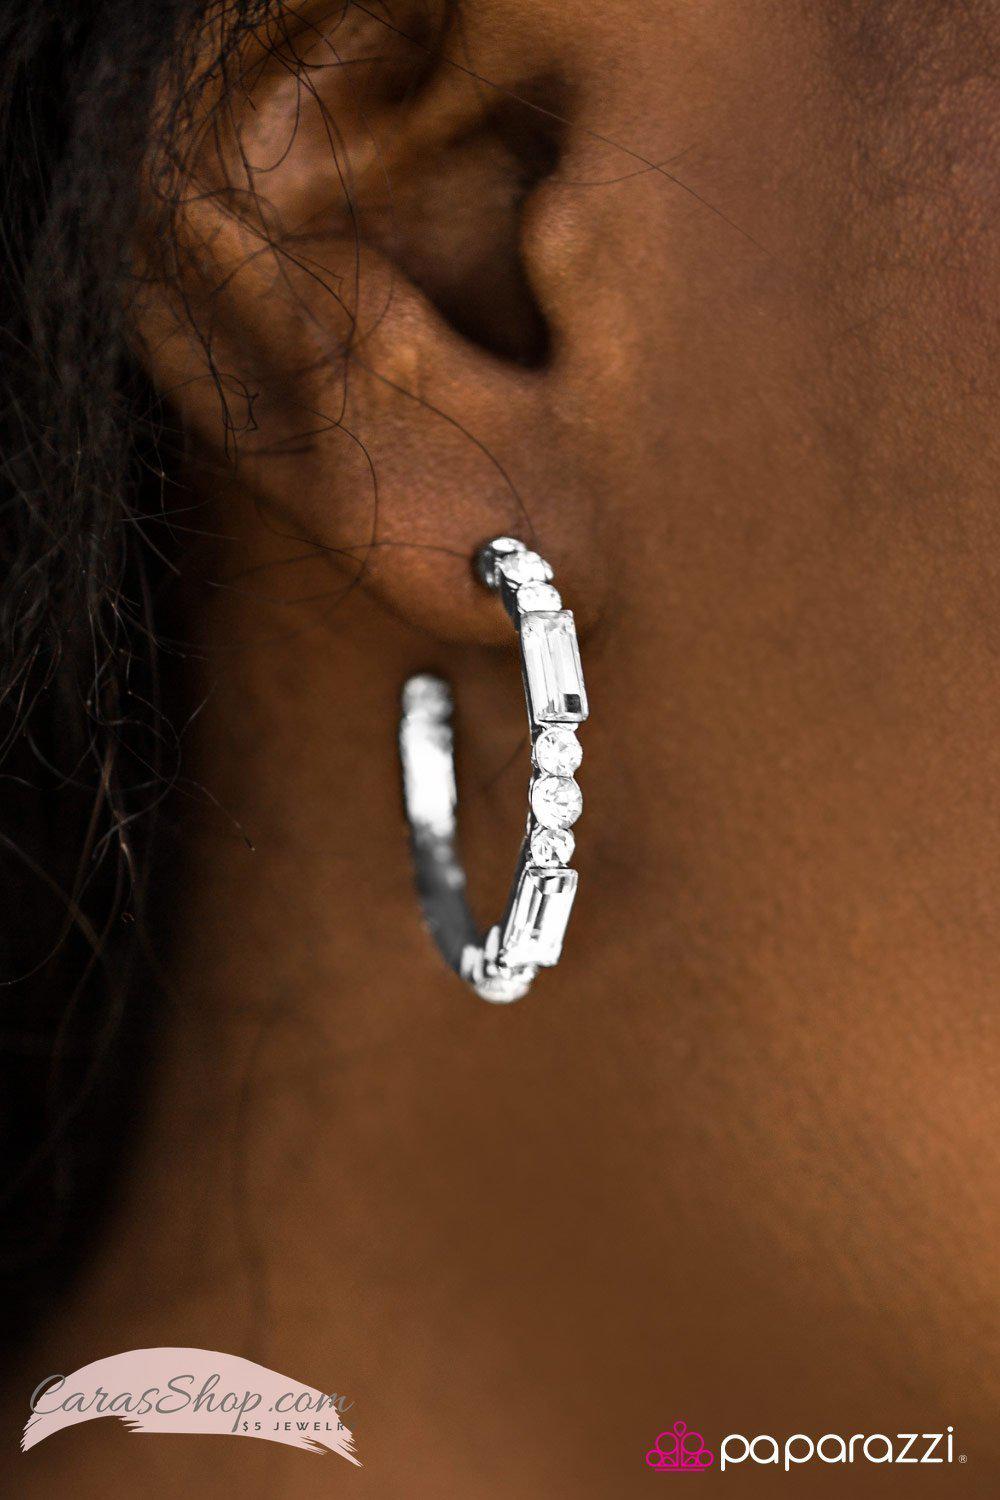 BLING on the Night - White Rhinestone Hoop Earrings - Paparazzi Accessories-CarasShop.com - $5 Jewelry by Cara Jewels